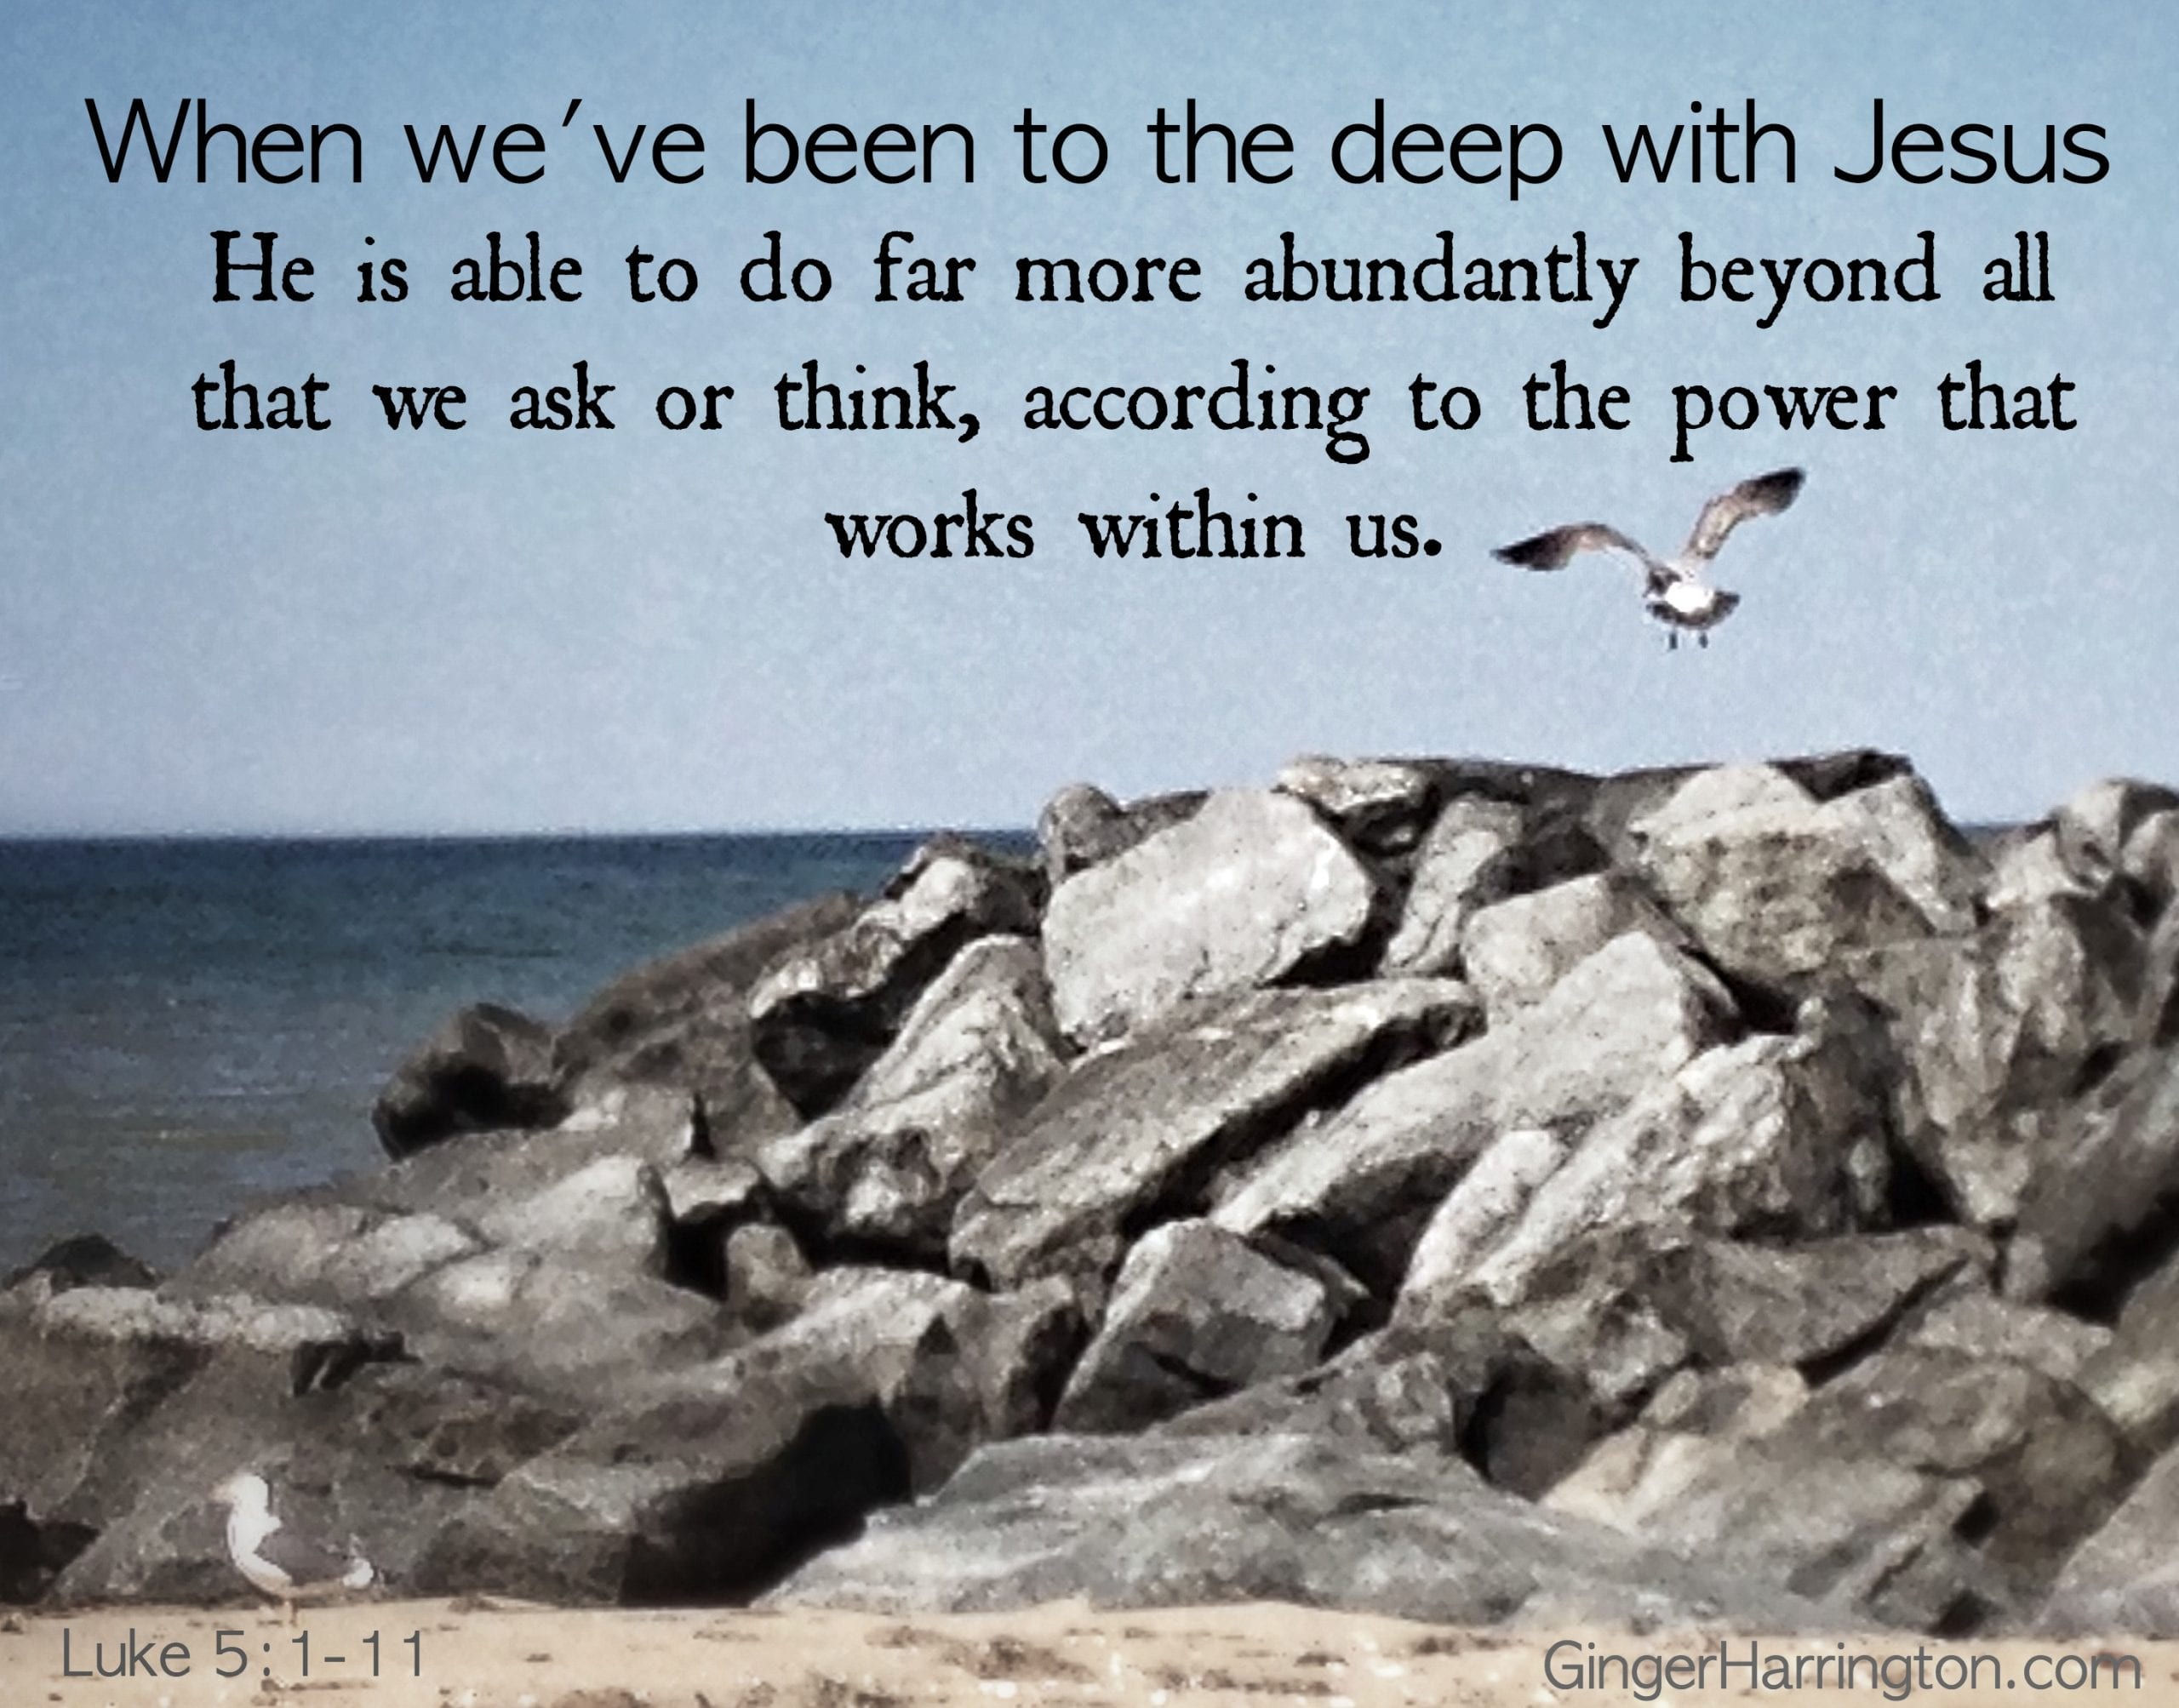 The Simple Truth About Going to the Deep With Jesus